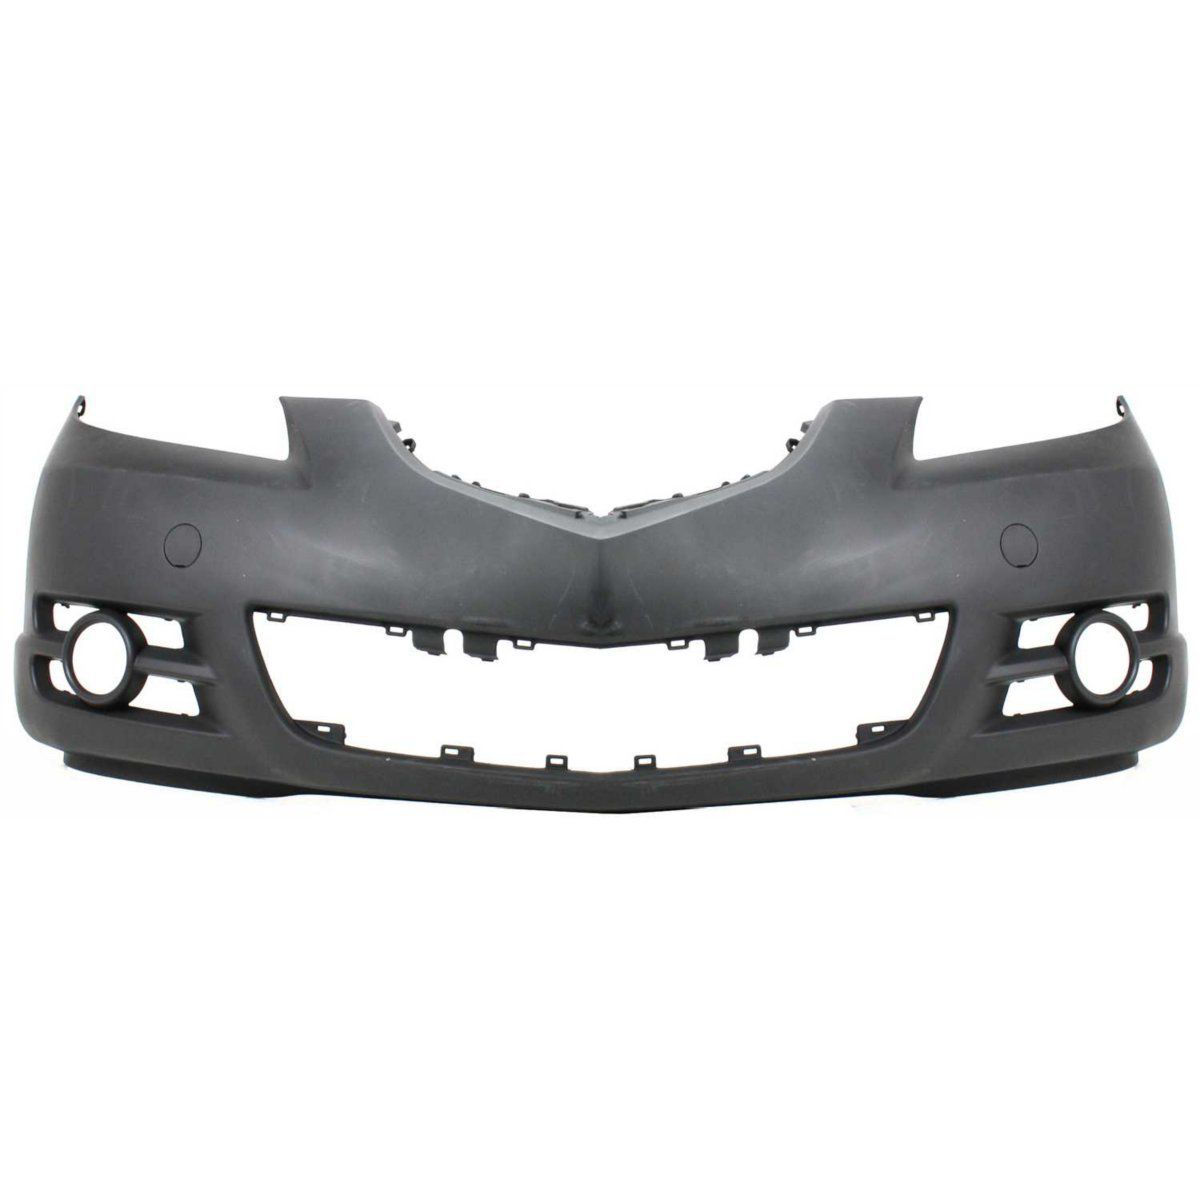 2004-2006 MAZDA 3 Front Bumper Cover Sedan  Sport Type  w/Fog Lamps Painted to Match